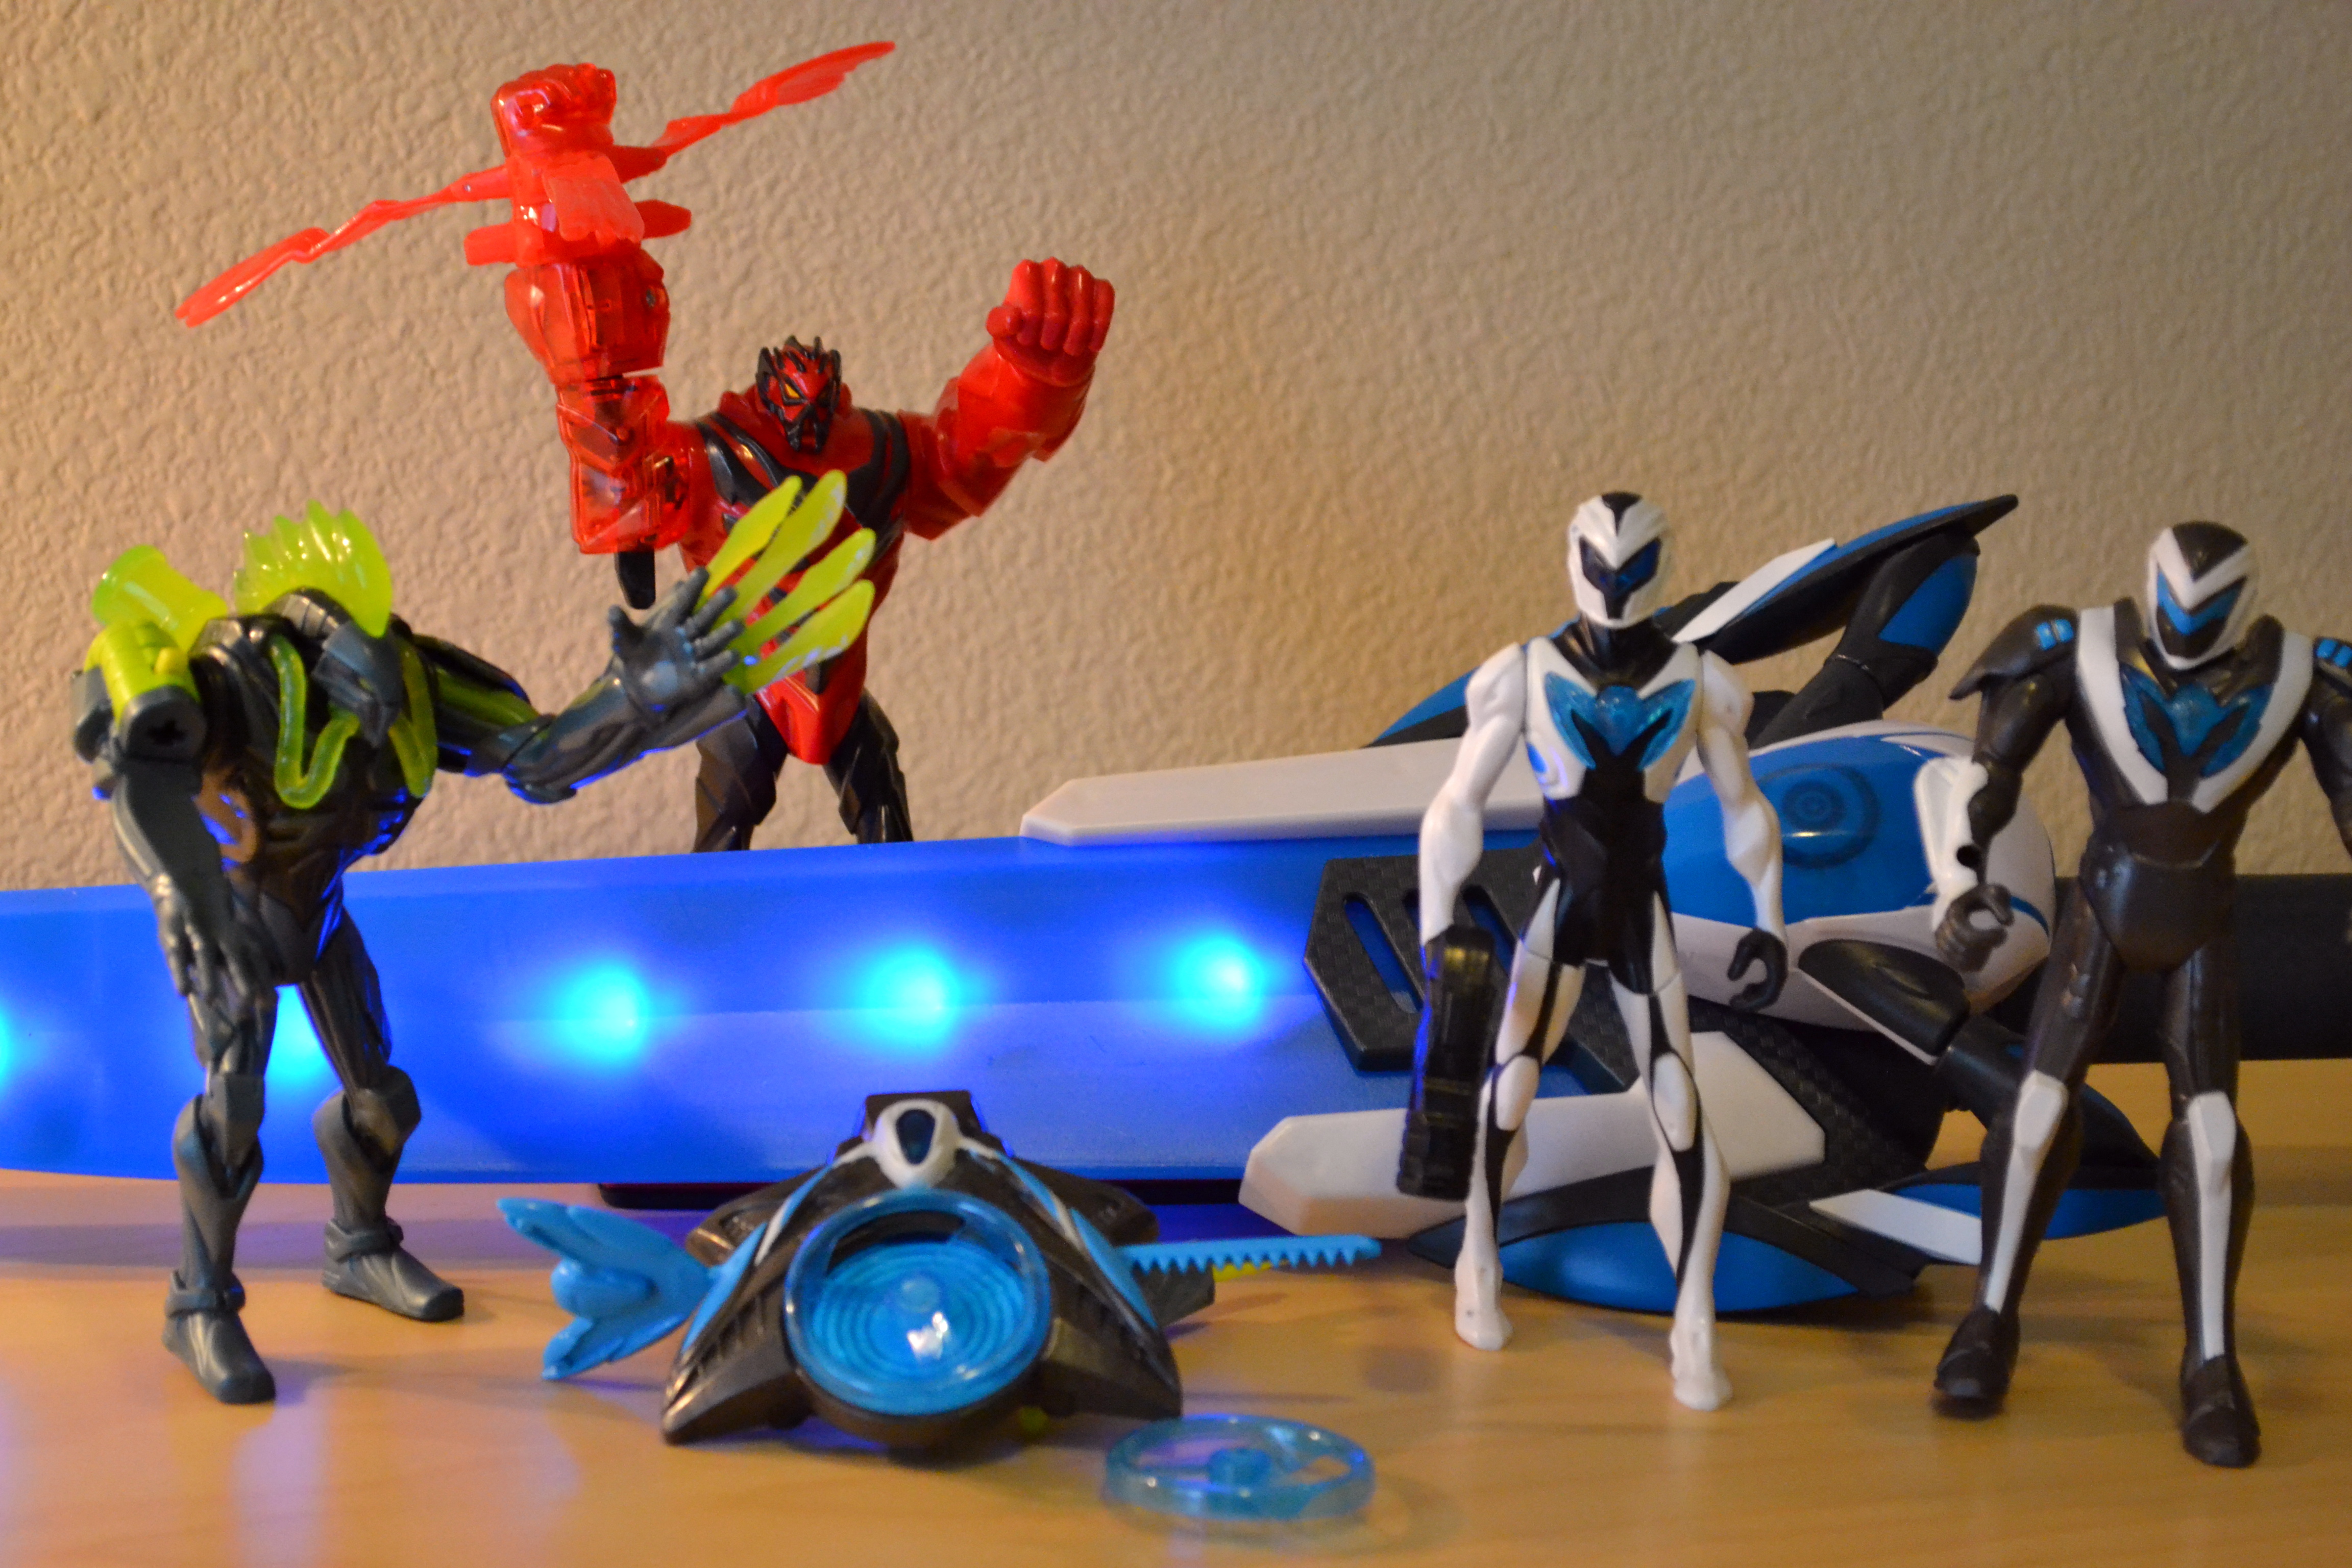 Power Up With Mattel's Max Steel for Some Turbo Family Fun - Dad Logic